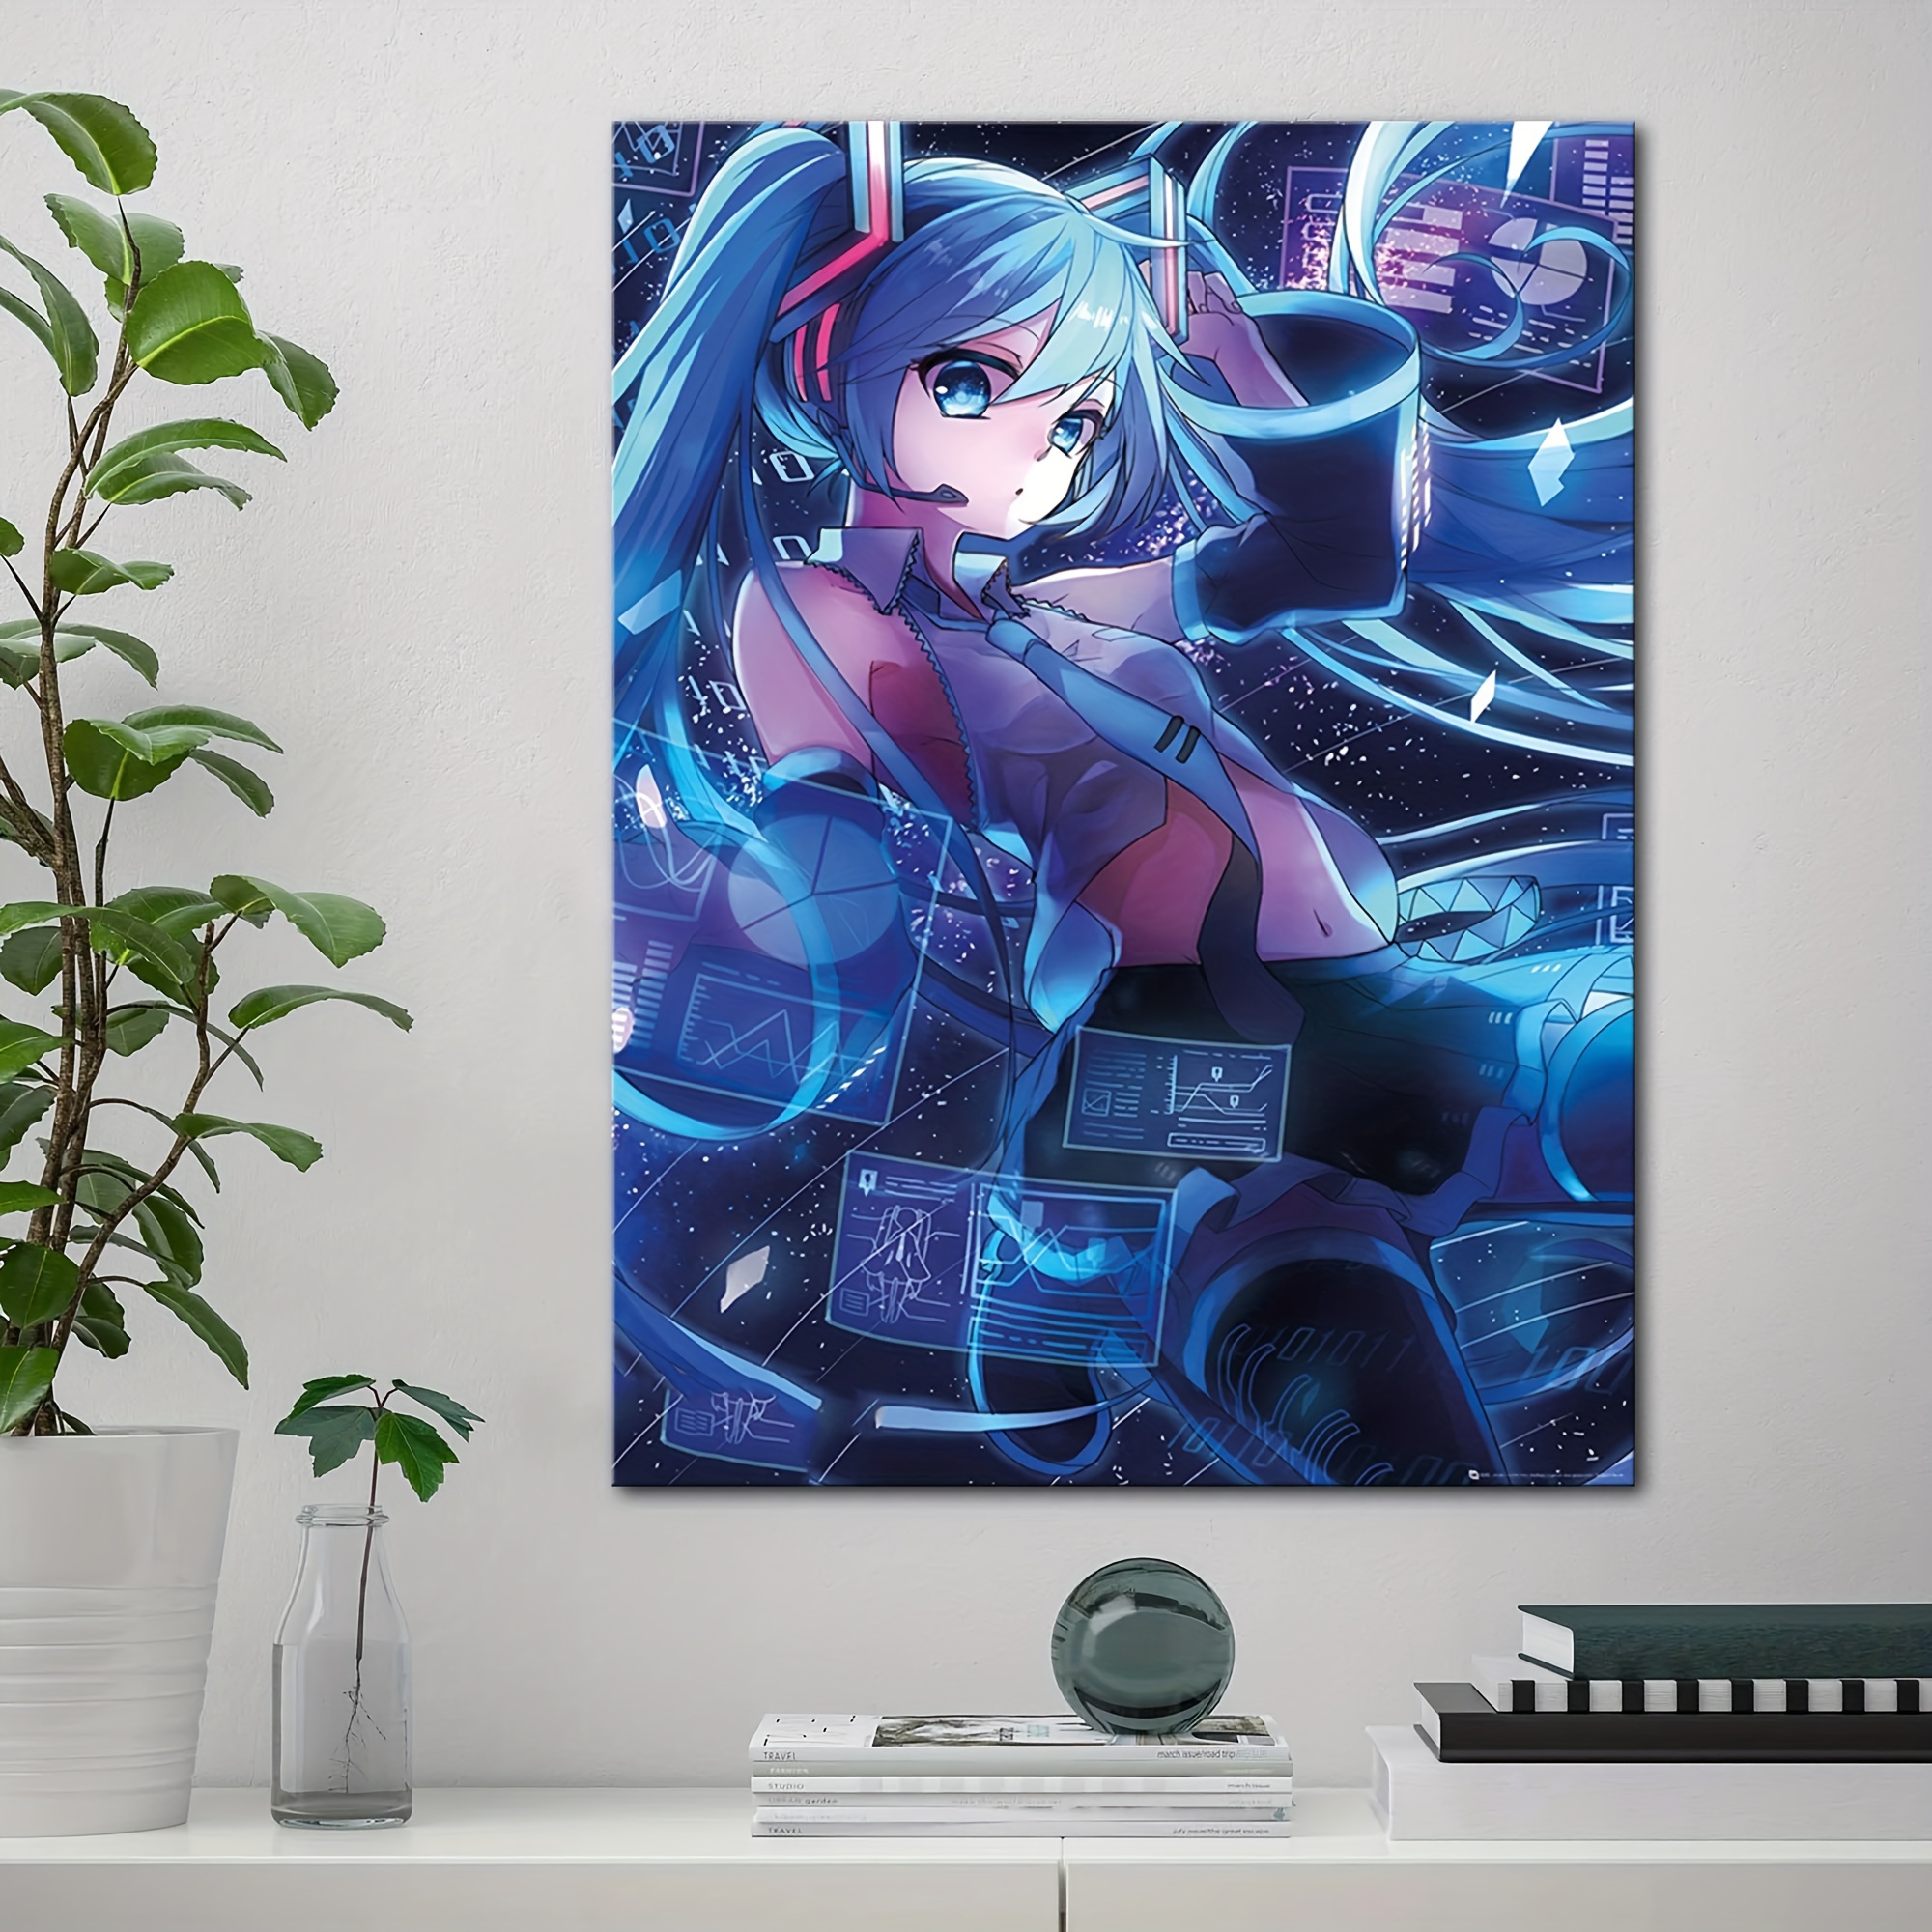 Anime Jjk Poster Manga Cover Wall Art Canvas Print Cartoon Posters for  Bedroom Living Room Wall Decor (8x12inch-Unframed,G)